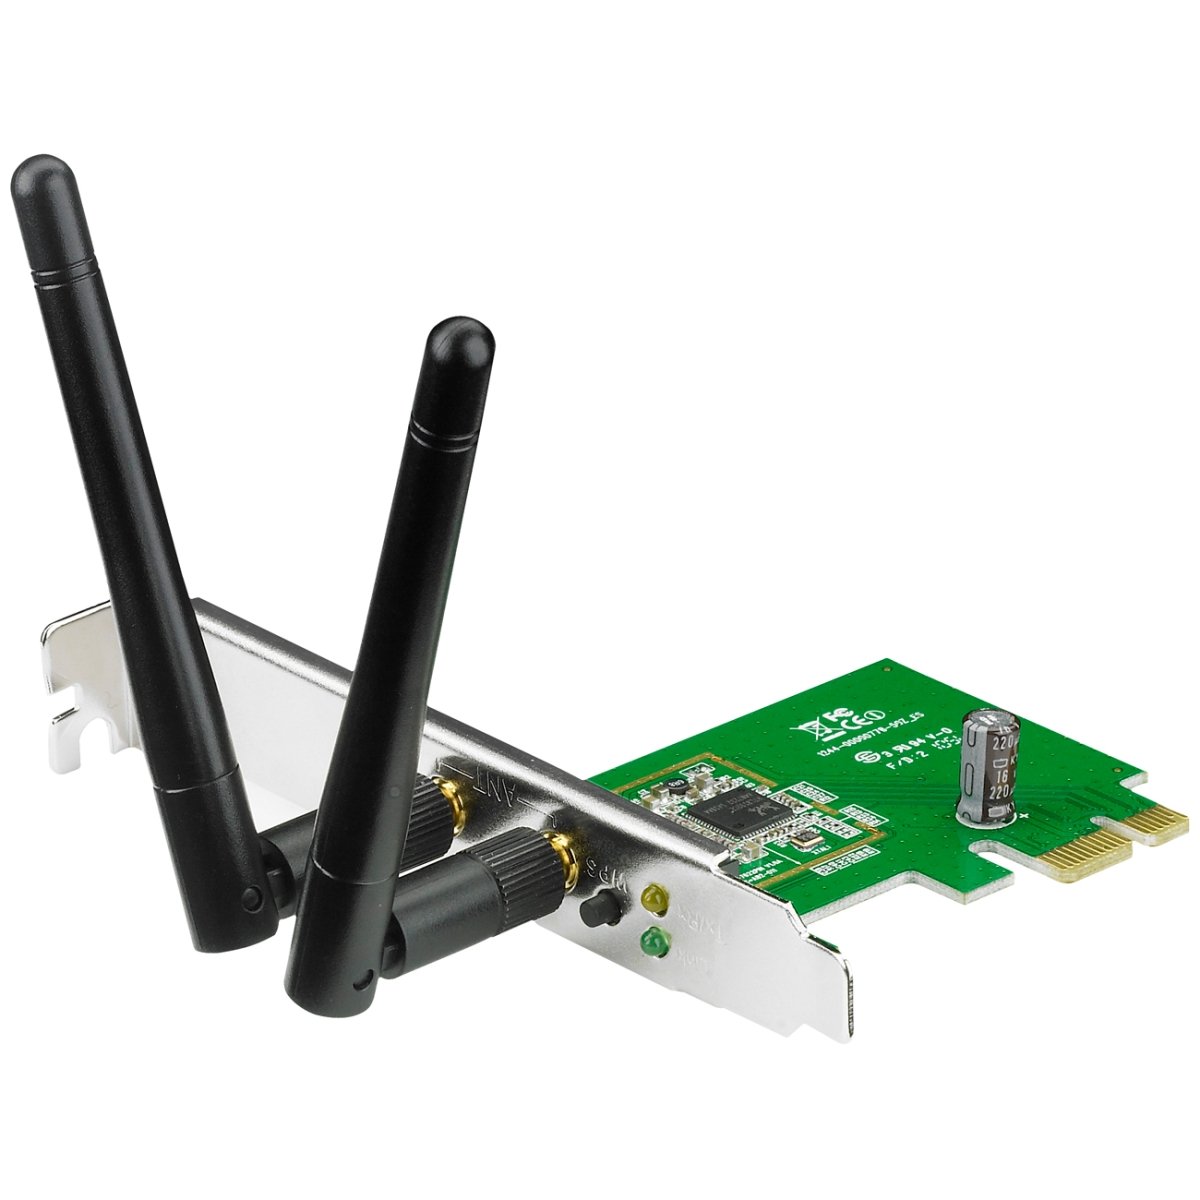 ASUS (PCE-N15) PCI Express Wireless Adapter Card